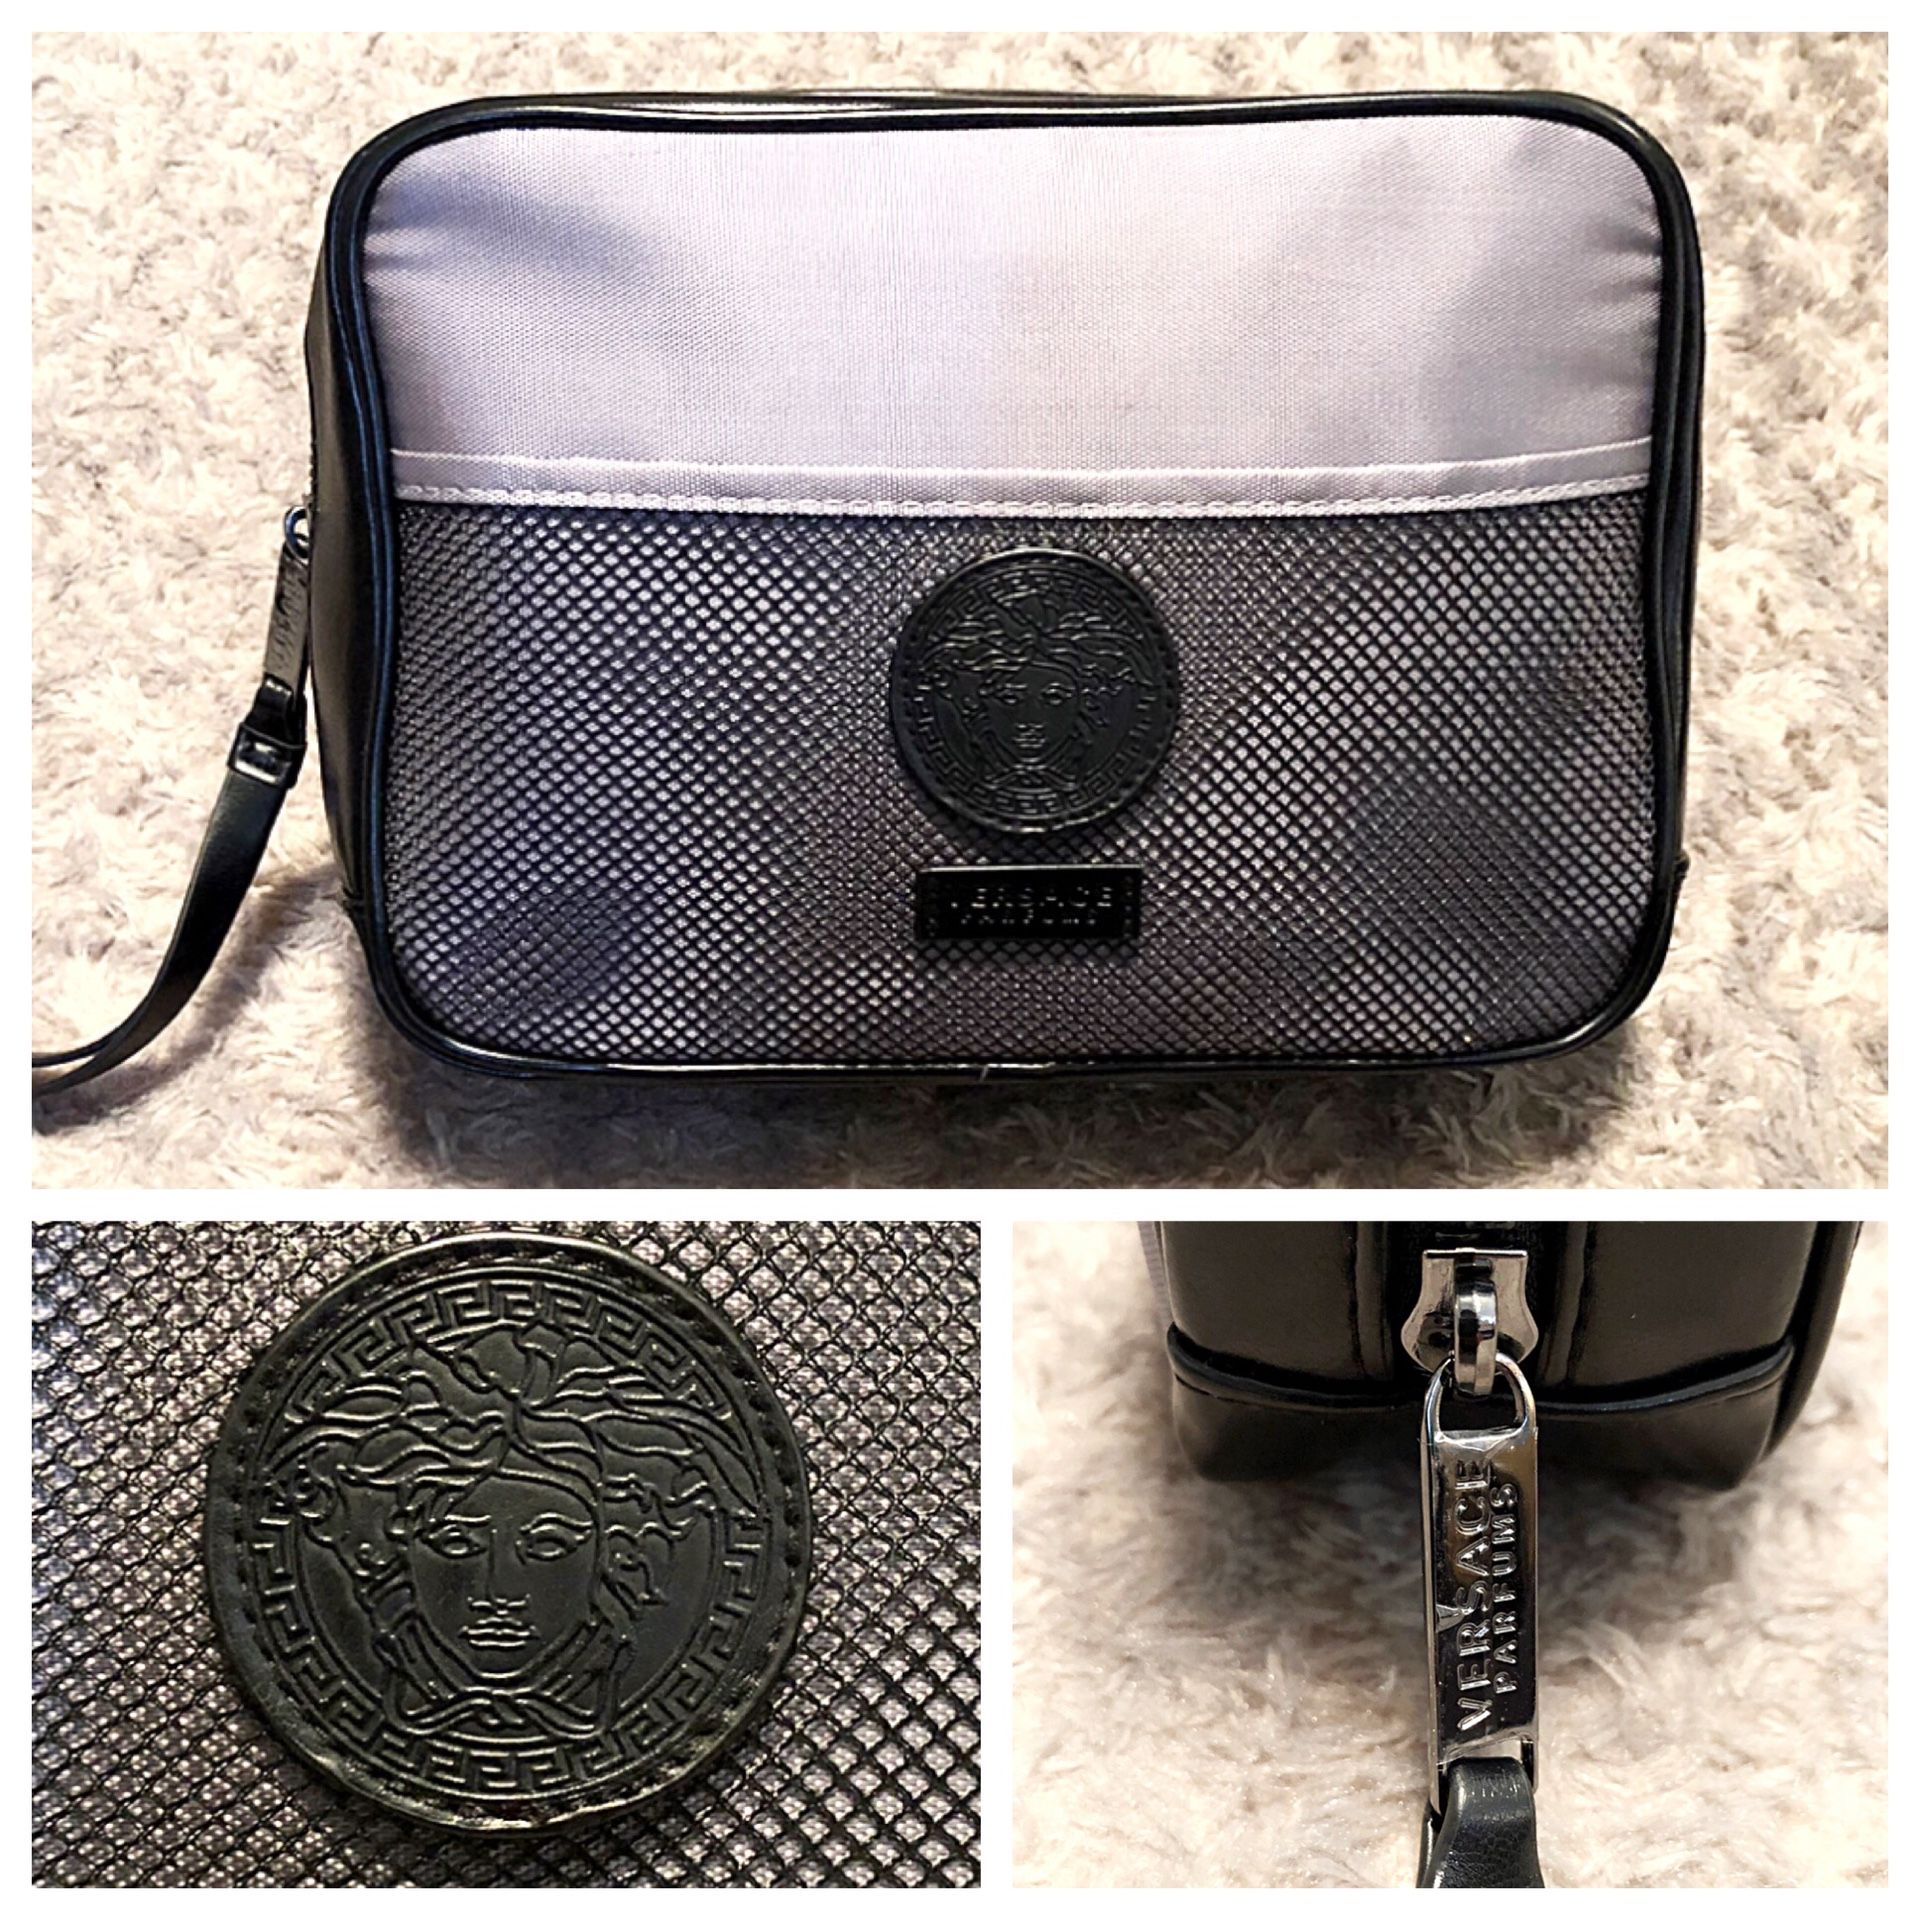 Men’s Versace Toiletry bag with dust bag. Brand new never used. Excellent condition! Men’s Versace perfume’s toiletry bag great for traveling. Depth